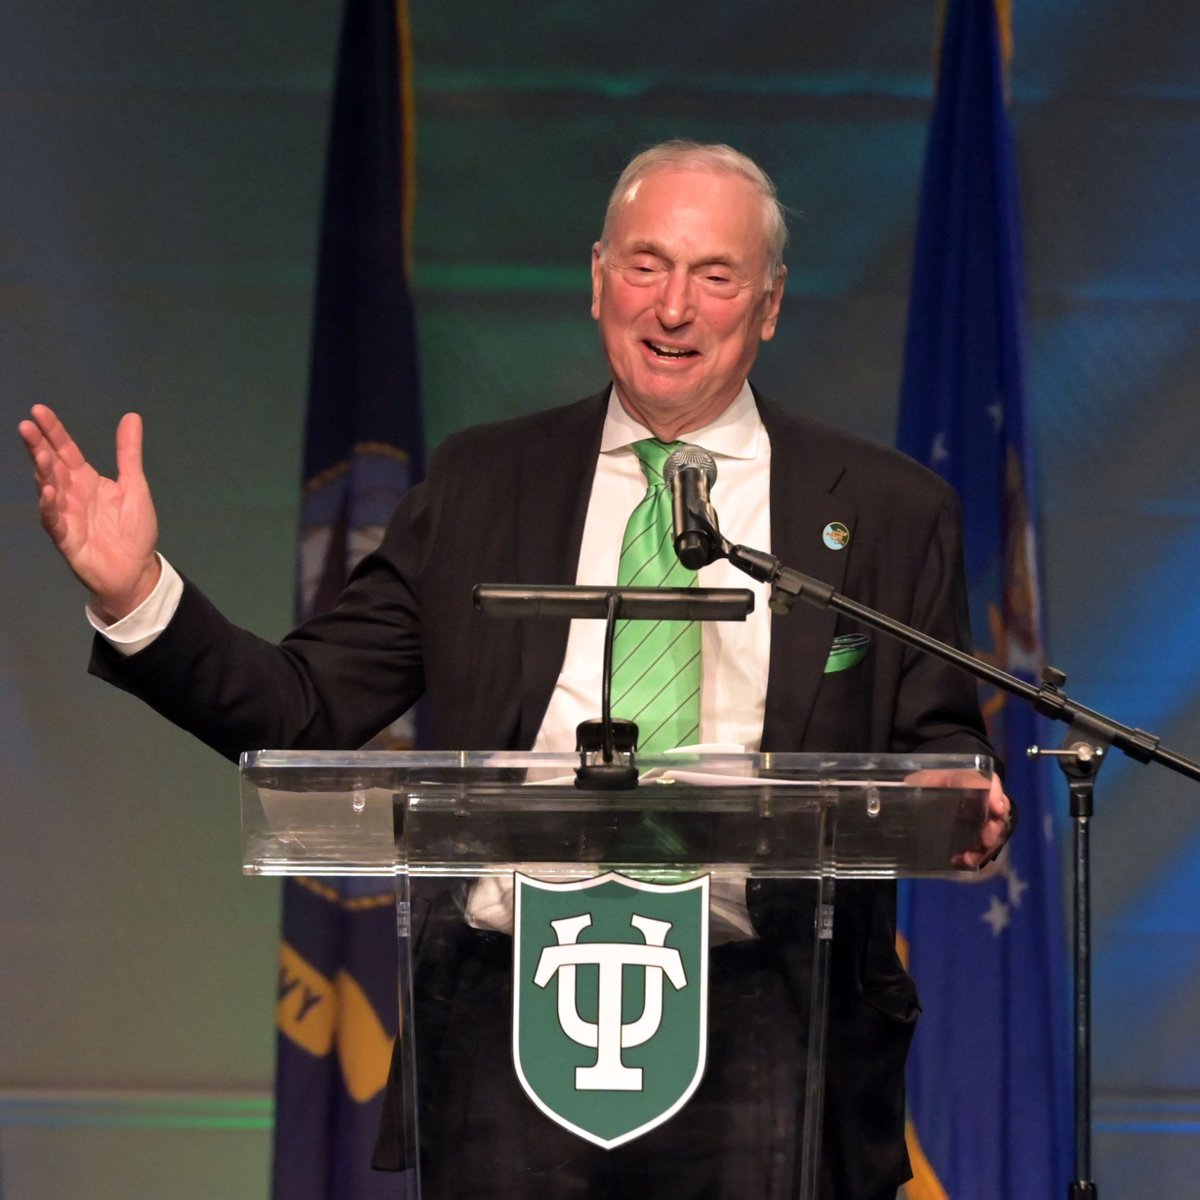 In recognition of his leadership in healthcare, Robert I. Grossman, MD, CEO of NYU Langone Health and dean of NYU Grossman School of Medicine, was recently honored with the Distinguished Alumni Award from @Tulane University. Congratulations, Dr. Grossman!